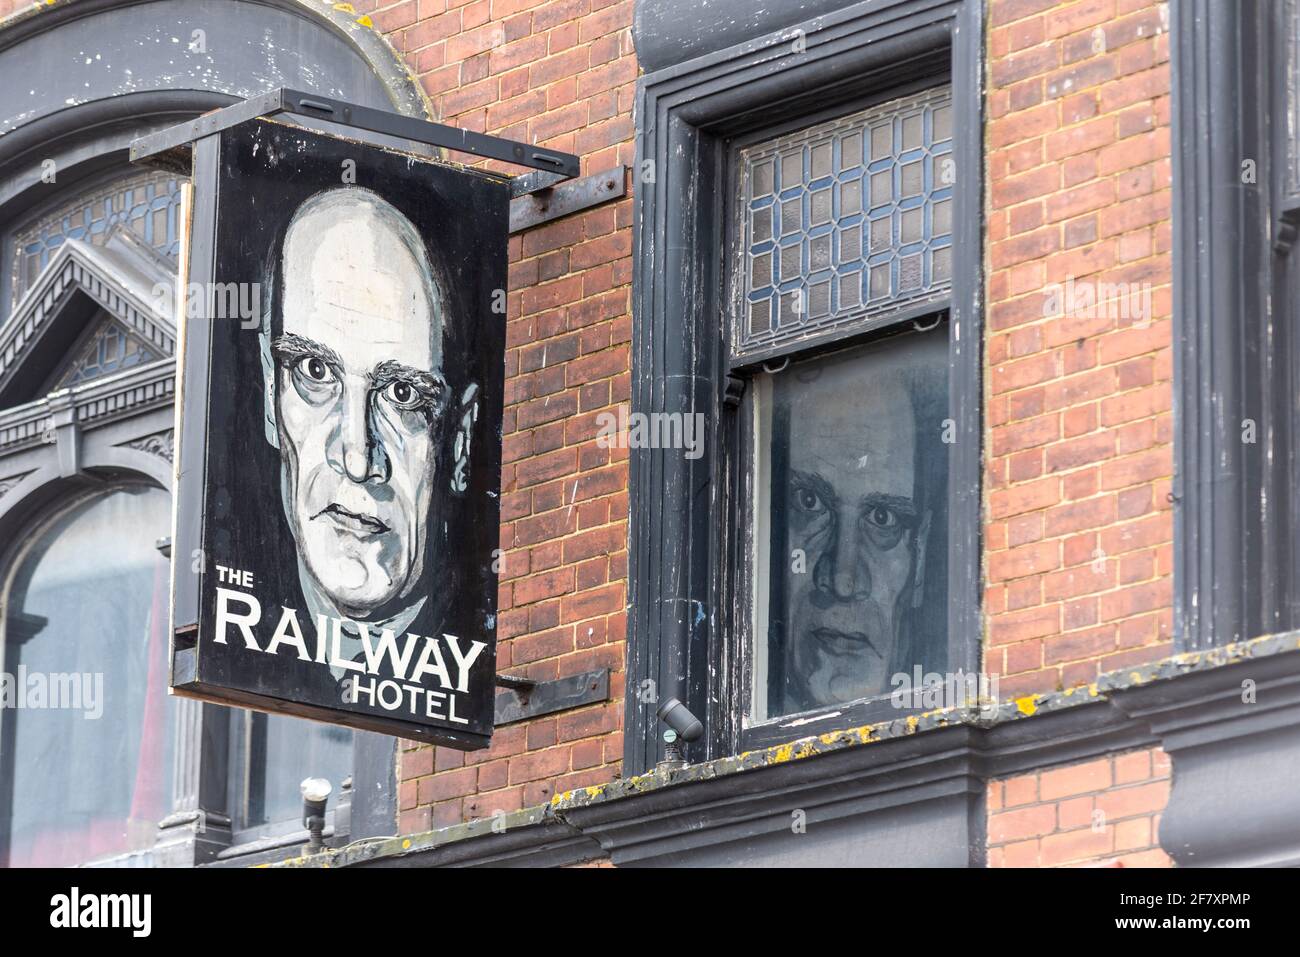 Railway Hotel pub & accommodation in Southend on Sea, Essex, UK. Known for its live music and vegan menu, closed down by COVID 19. Wilko Johnson sign Stock Photo